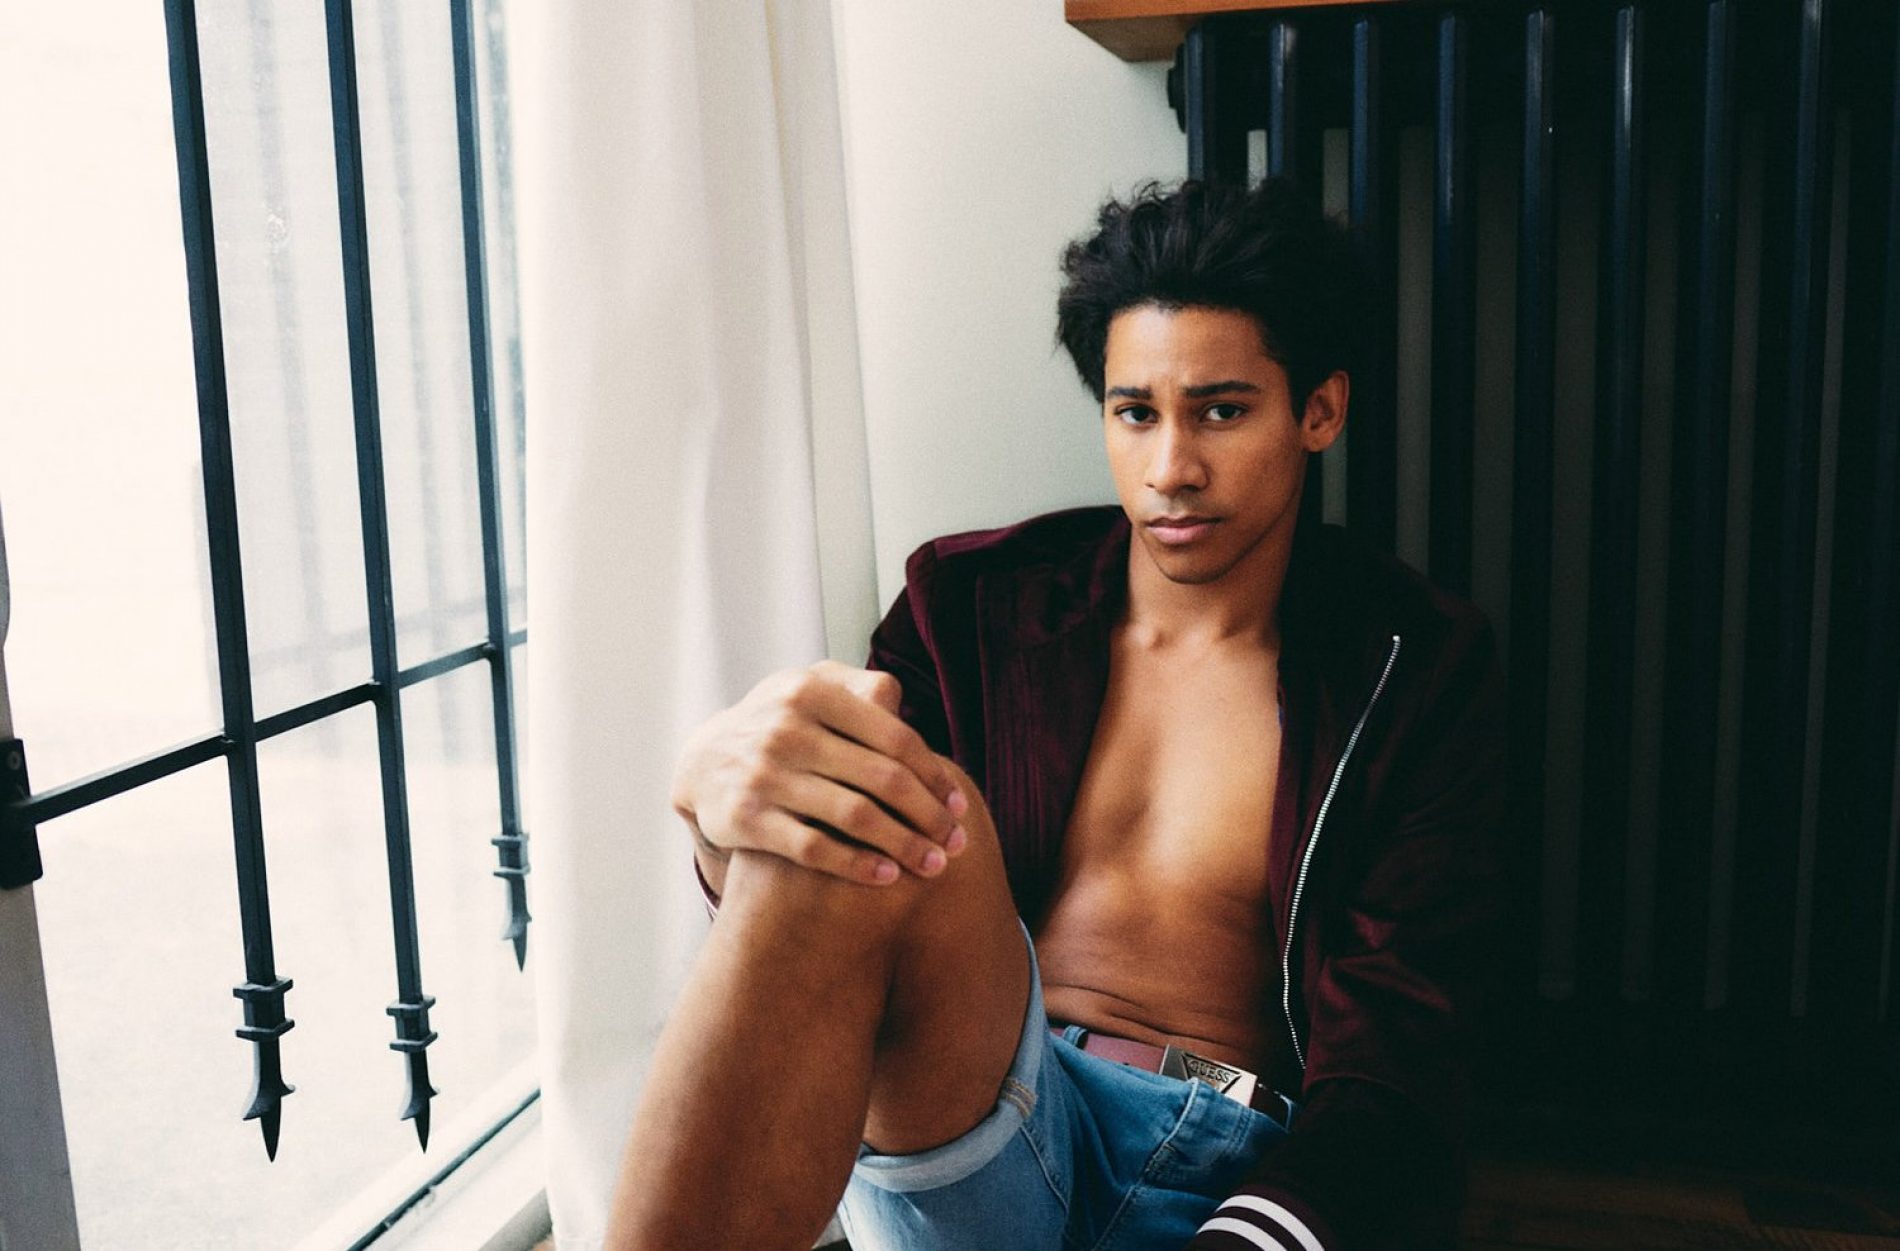 Keiynan Lonsdale is putting it all out there in a thirst-trap new video and some people can’t handle it